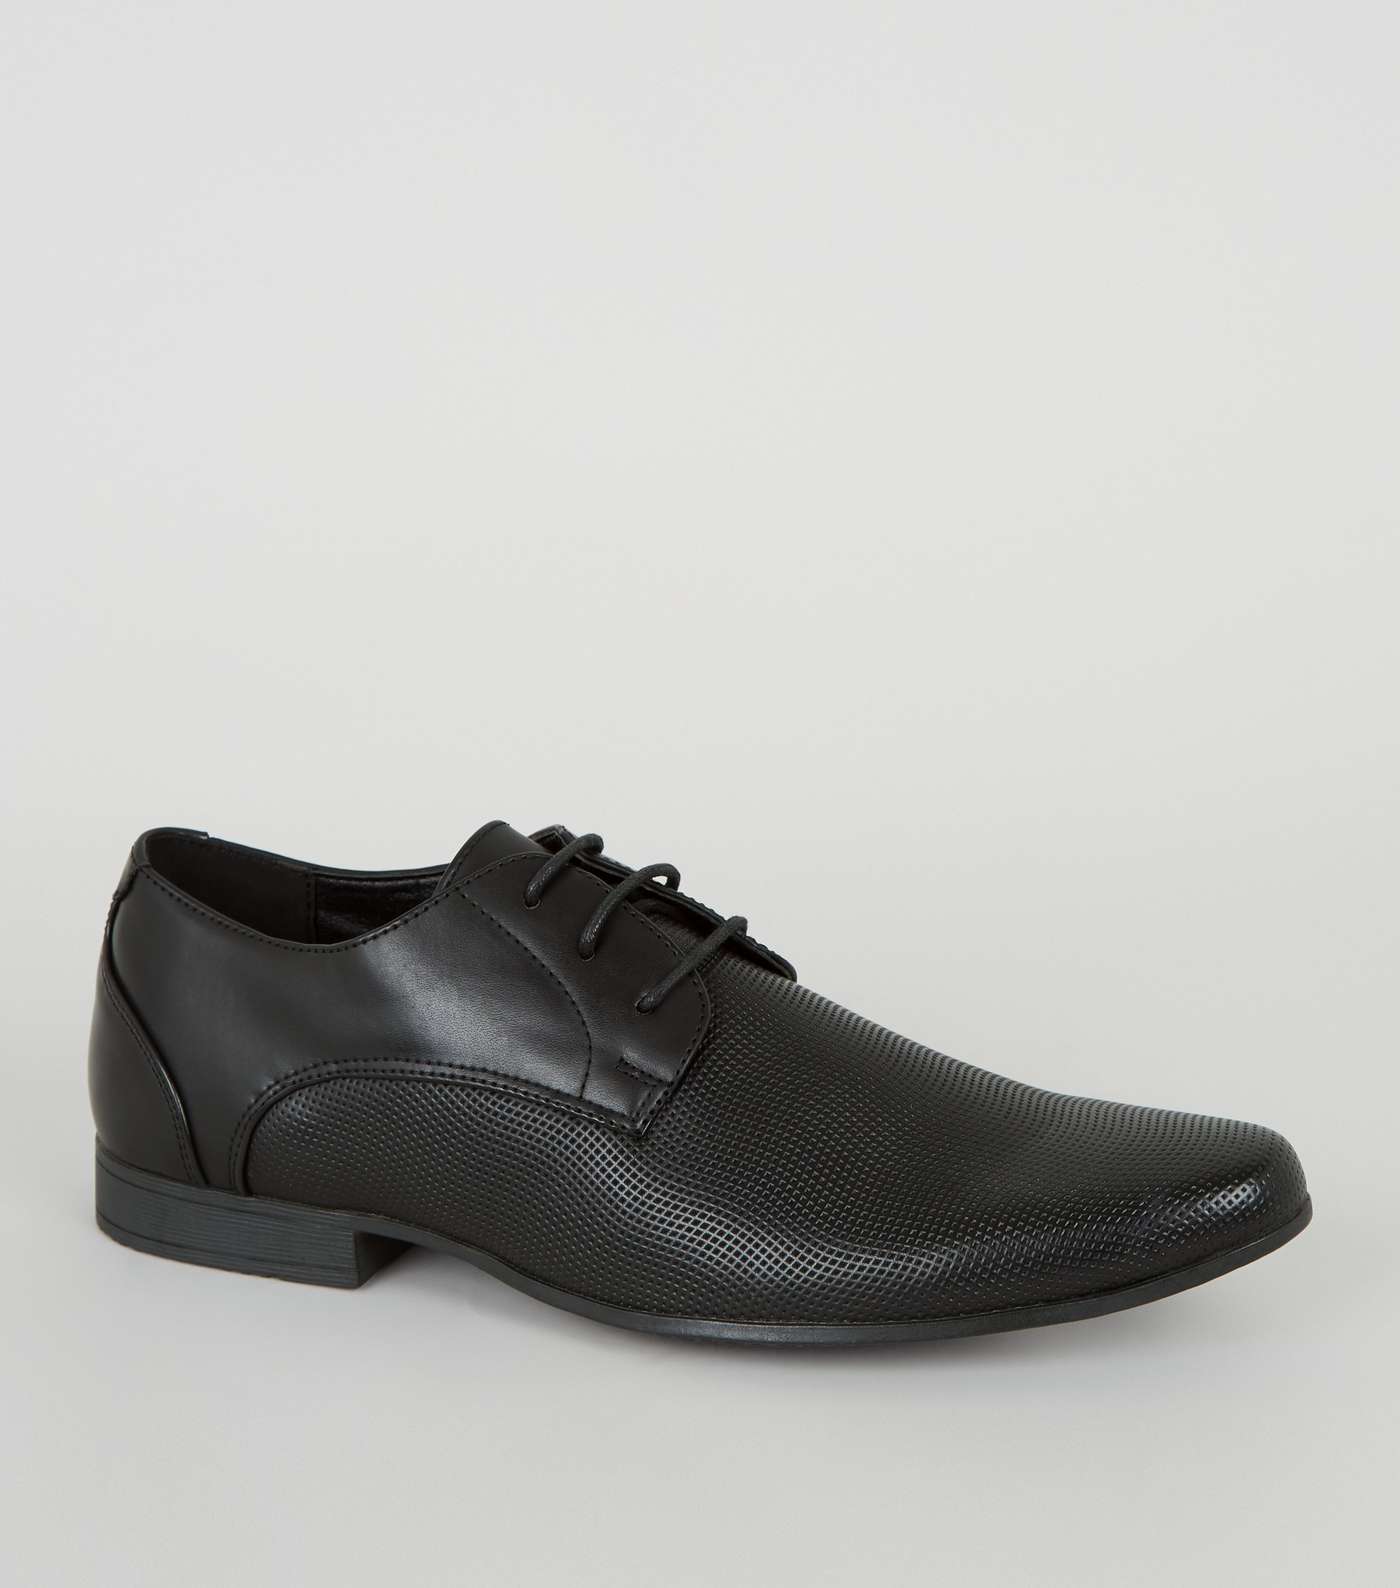 Black Perforated Formal Shoes Image 2